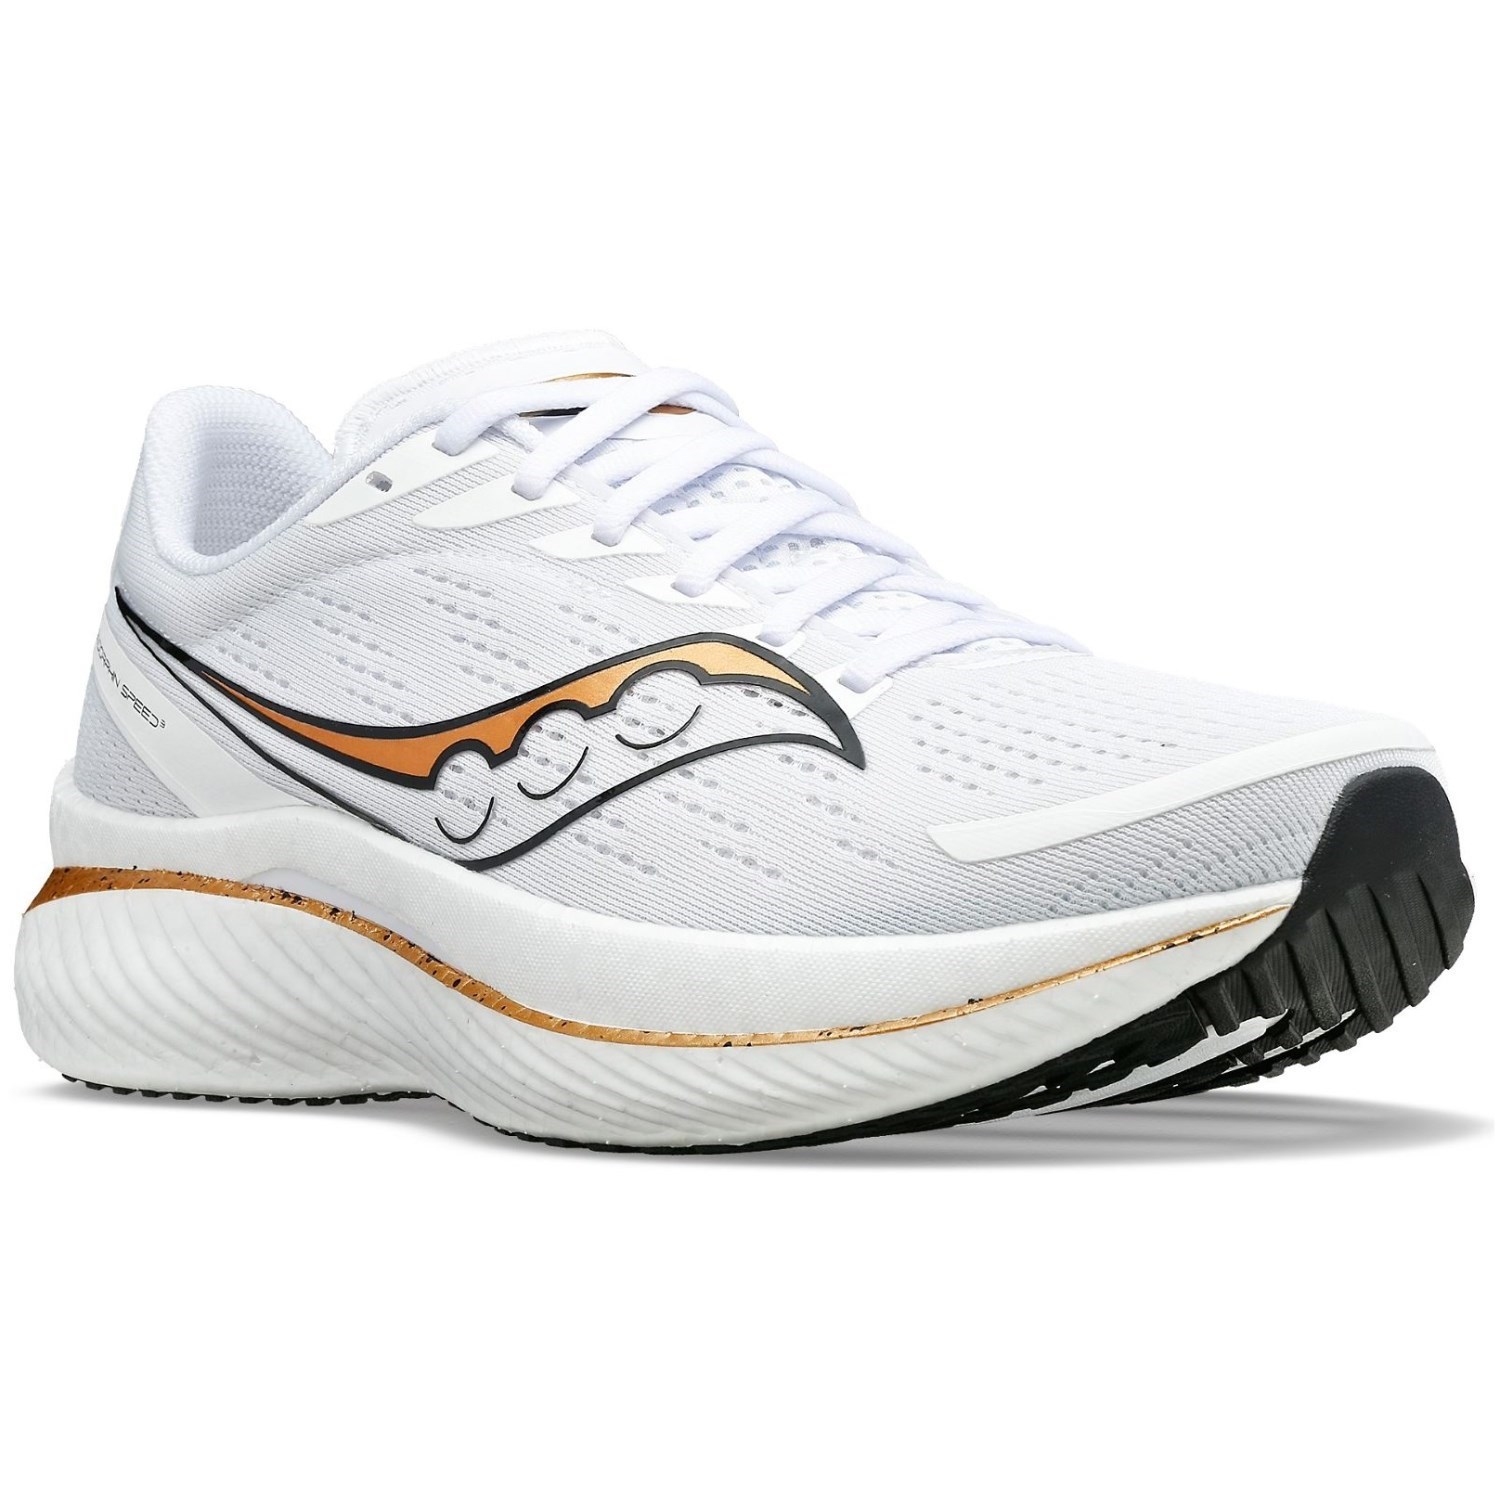 Saucony Endorphin Speed 3 - Mens Running Shoes - White/Gold | Sportitude